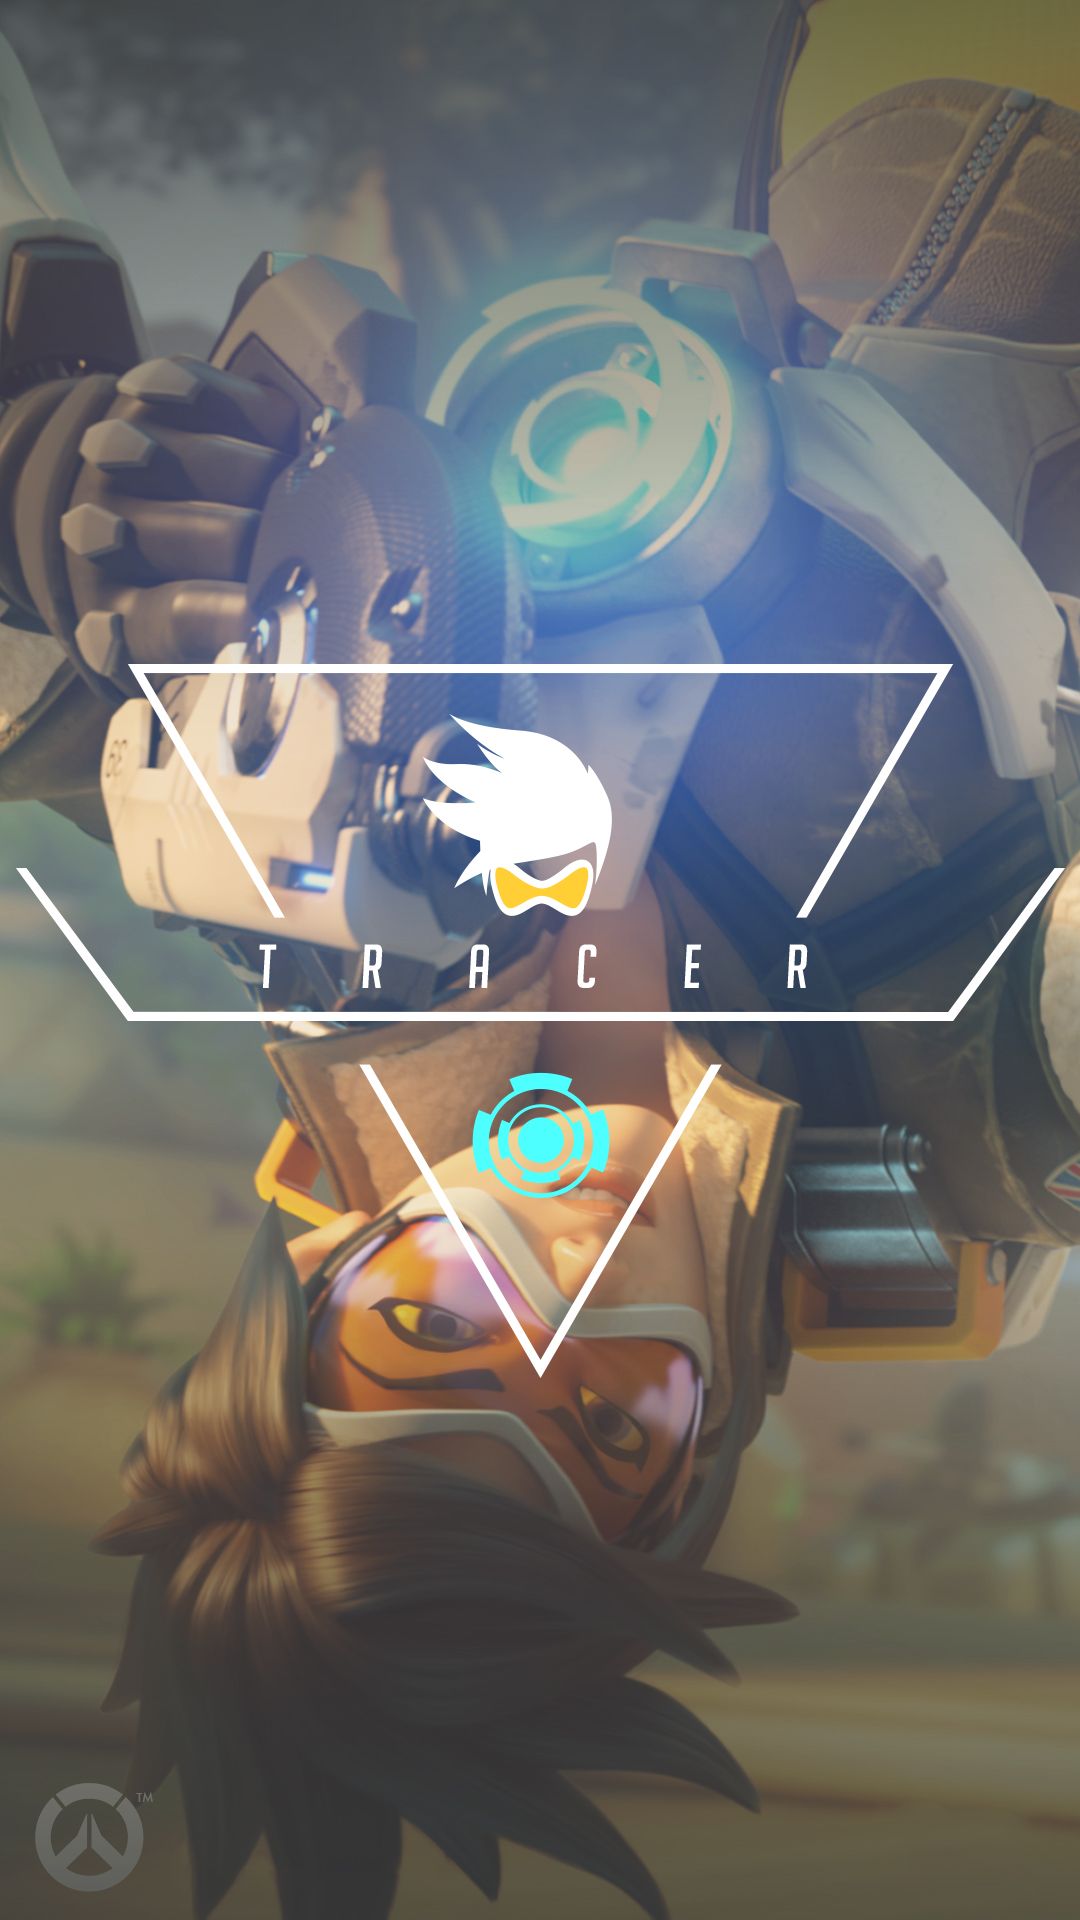 Overwatch Wallpaper. Overwatch wallpaper, Overwatch tracer, Overwatch